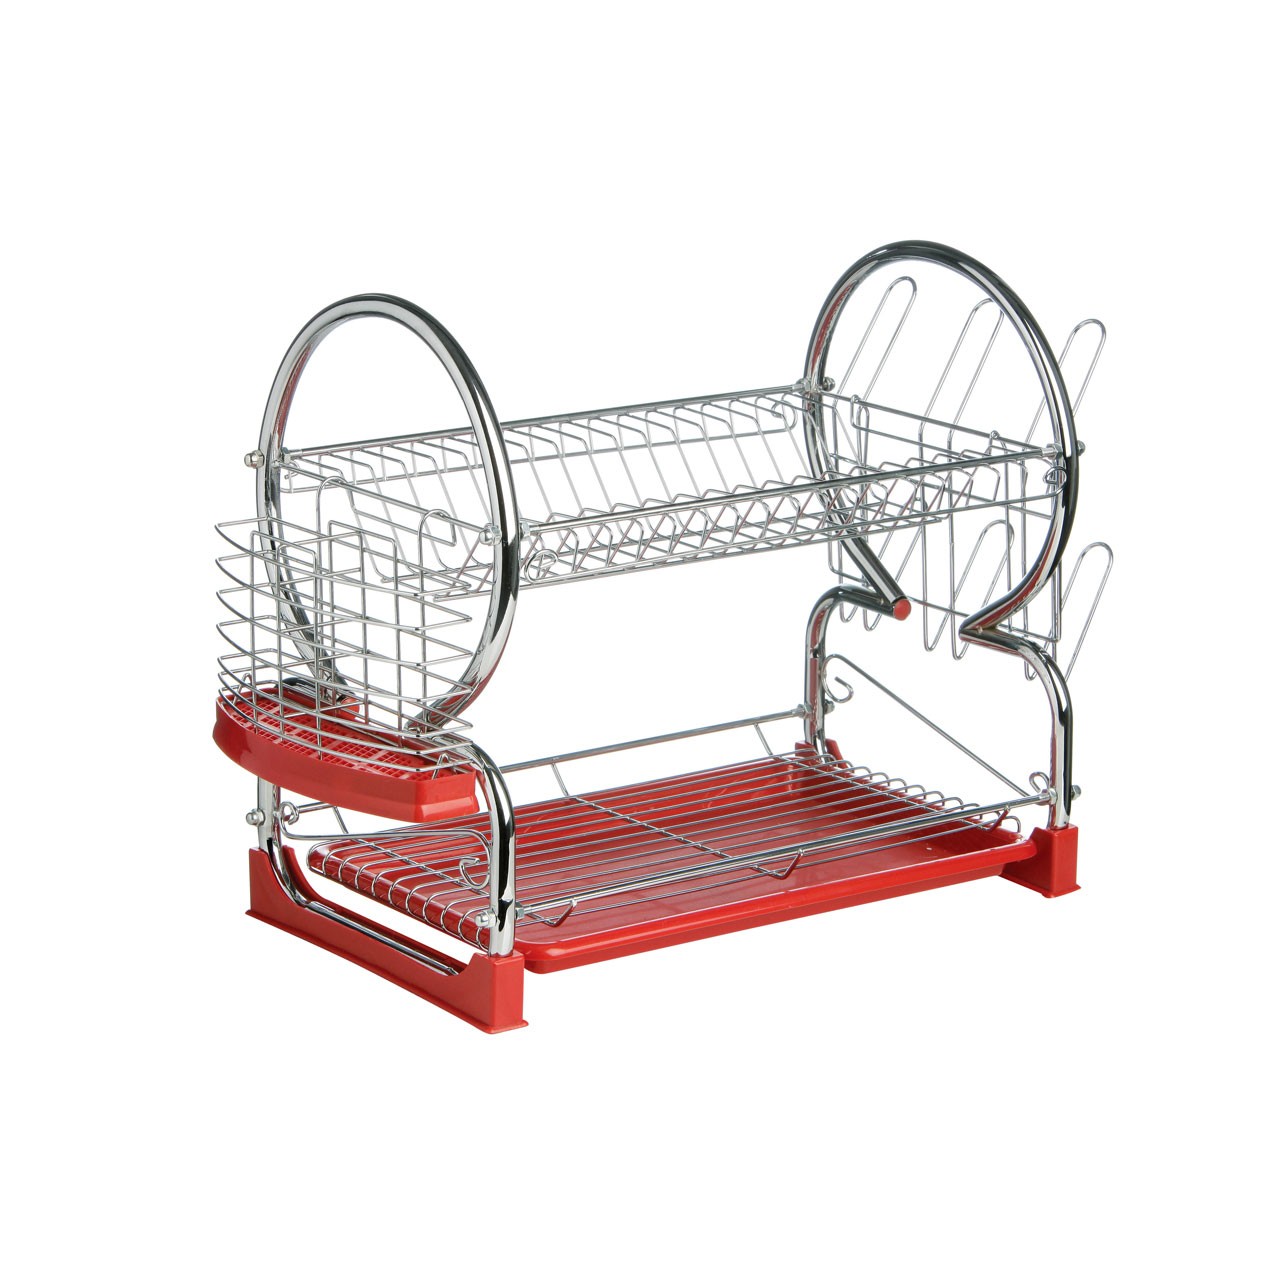 Prime Furnishing 2-Tier Dish Drainer - Red